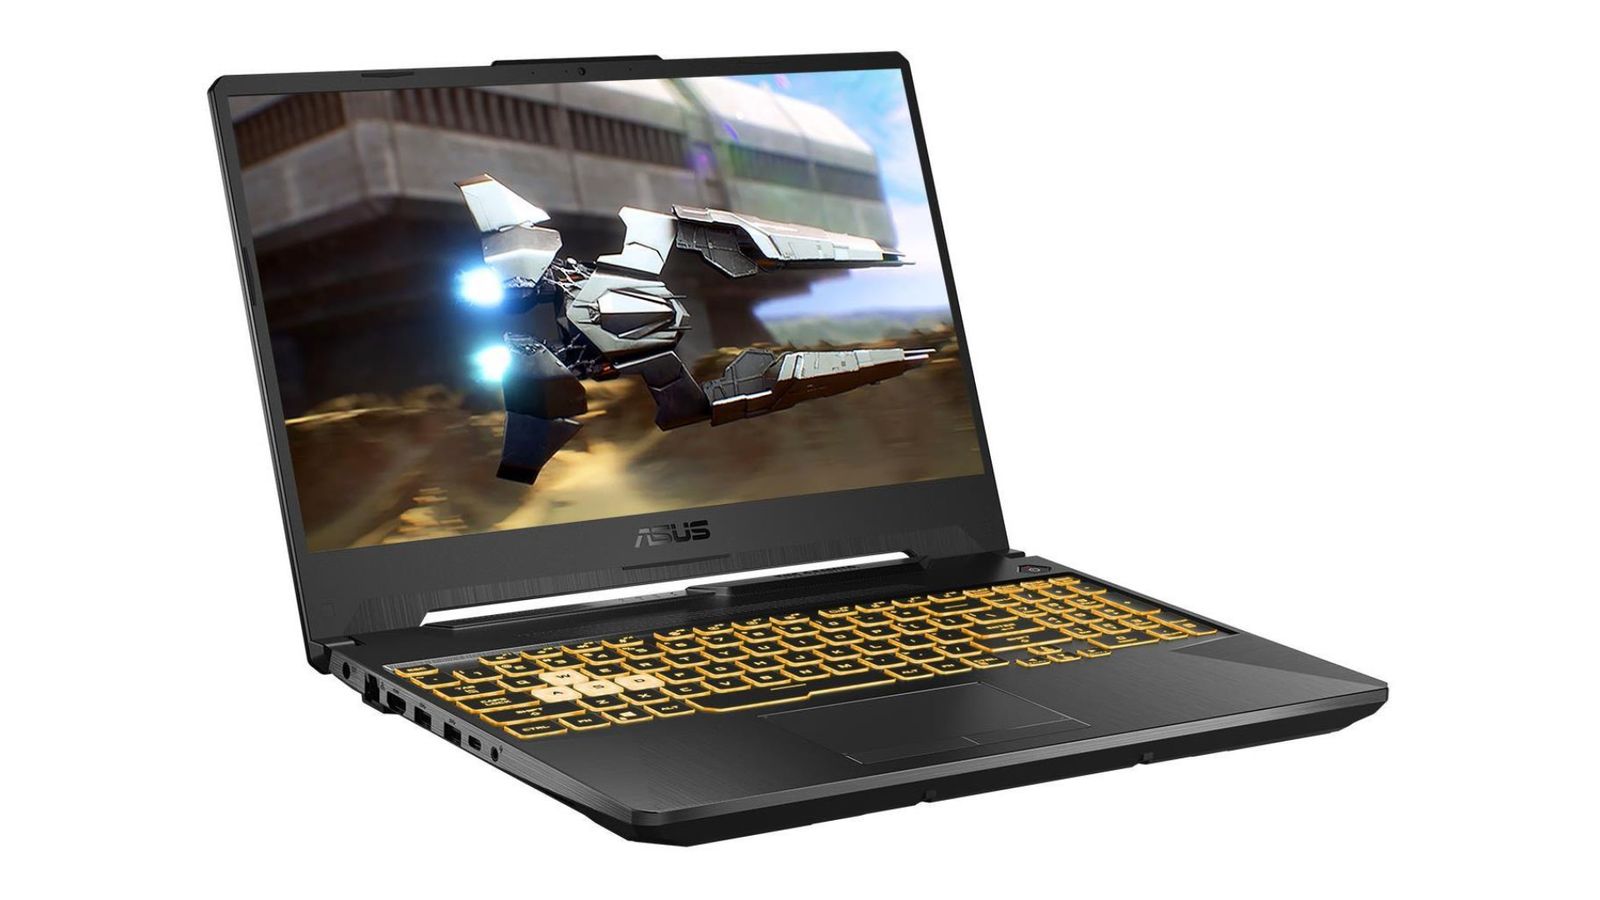 A product image of the Asus TUF Gaming F15, a dark grey laptop with yellow backlit keys, featuring a small spaceship taking off as the display background.